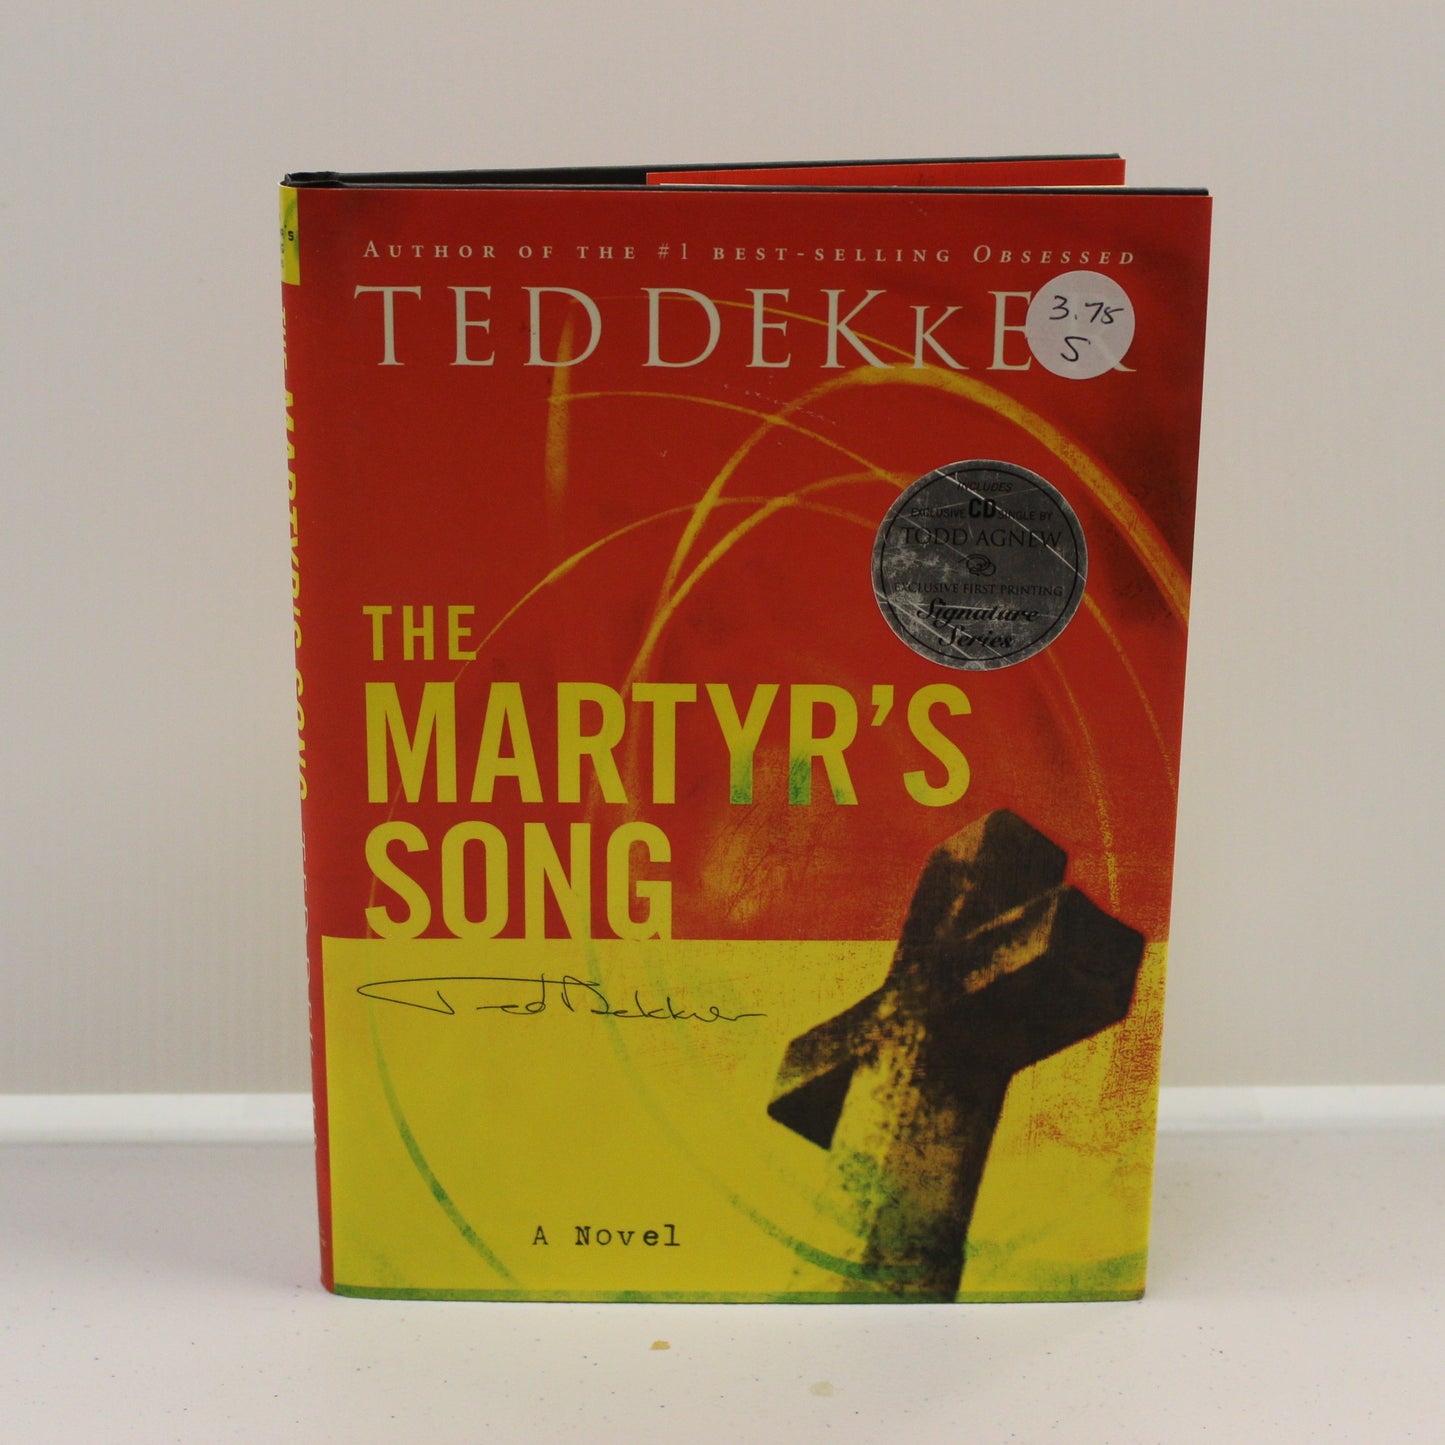 THE MARTYR'S SONG